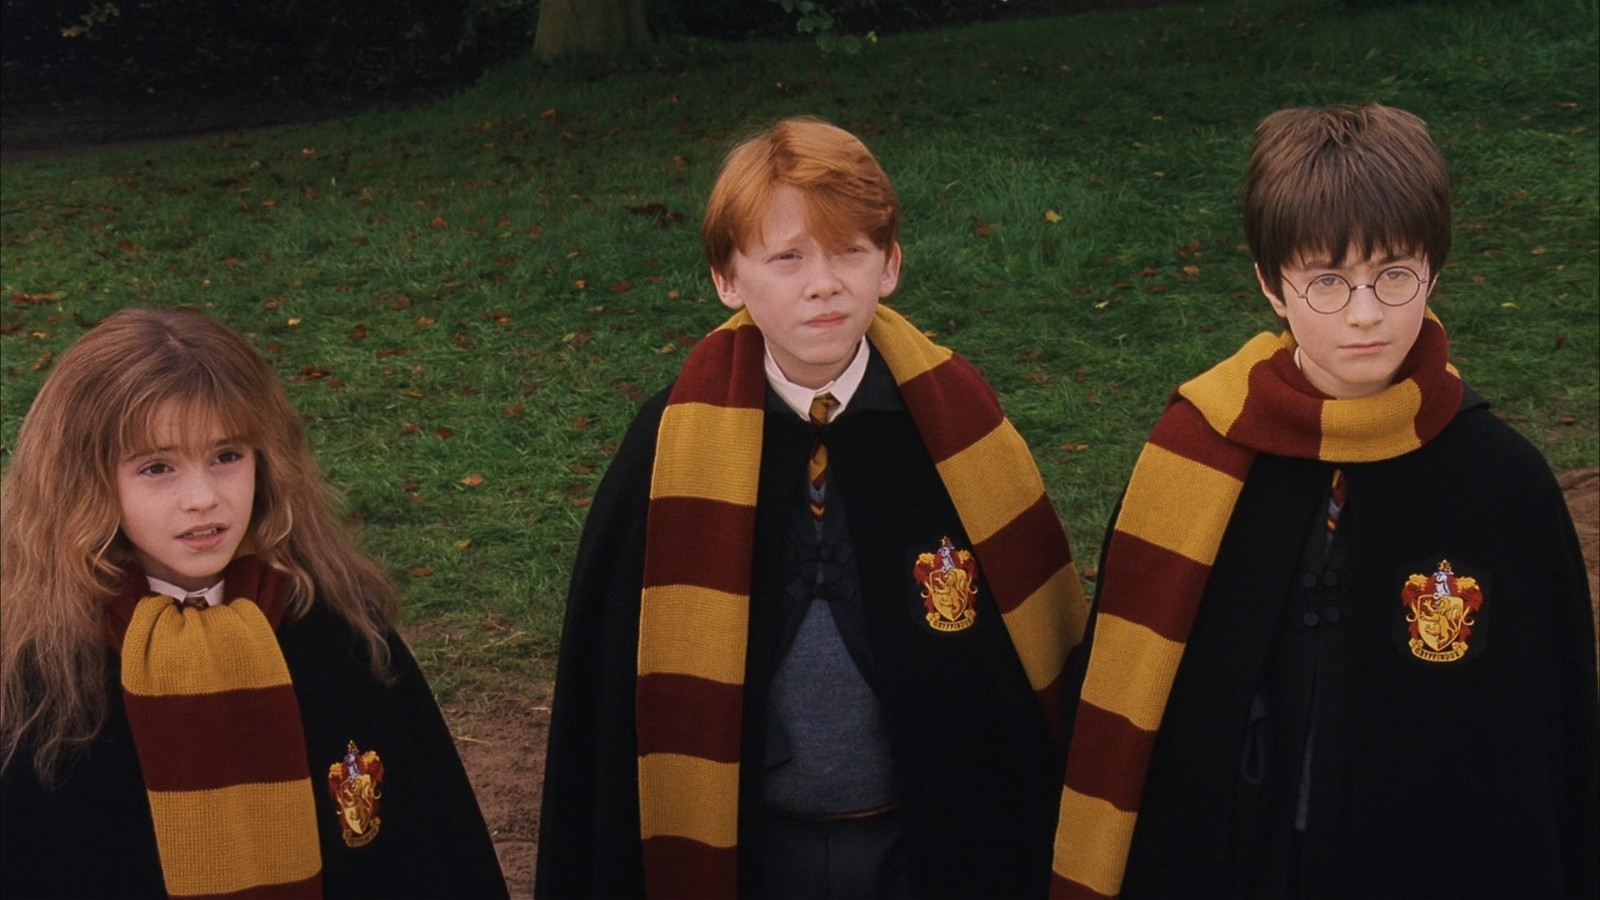 The Golden Trio from Harry Potter